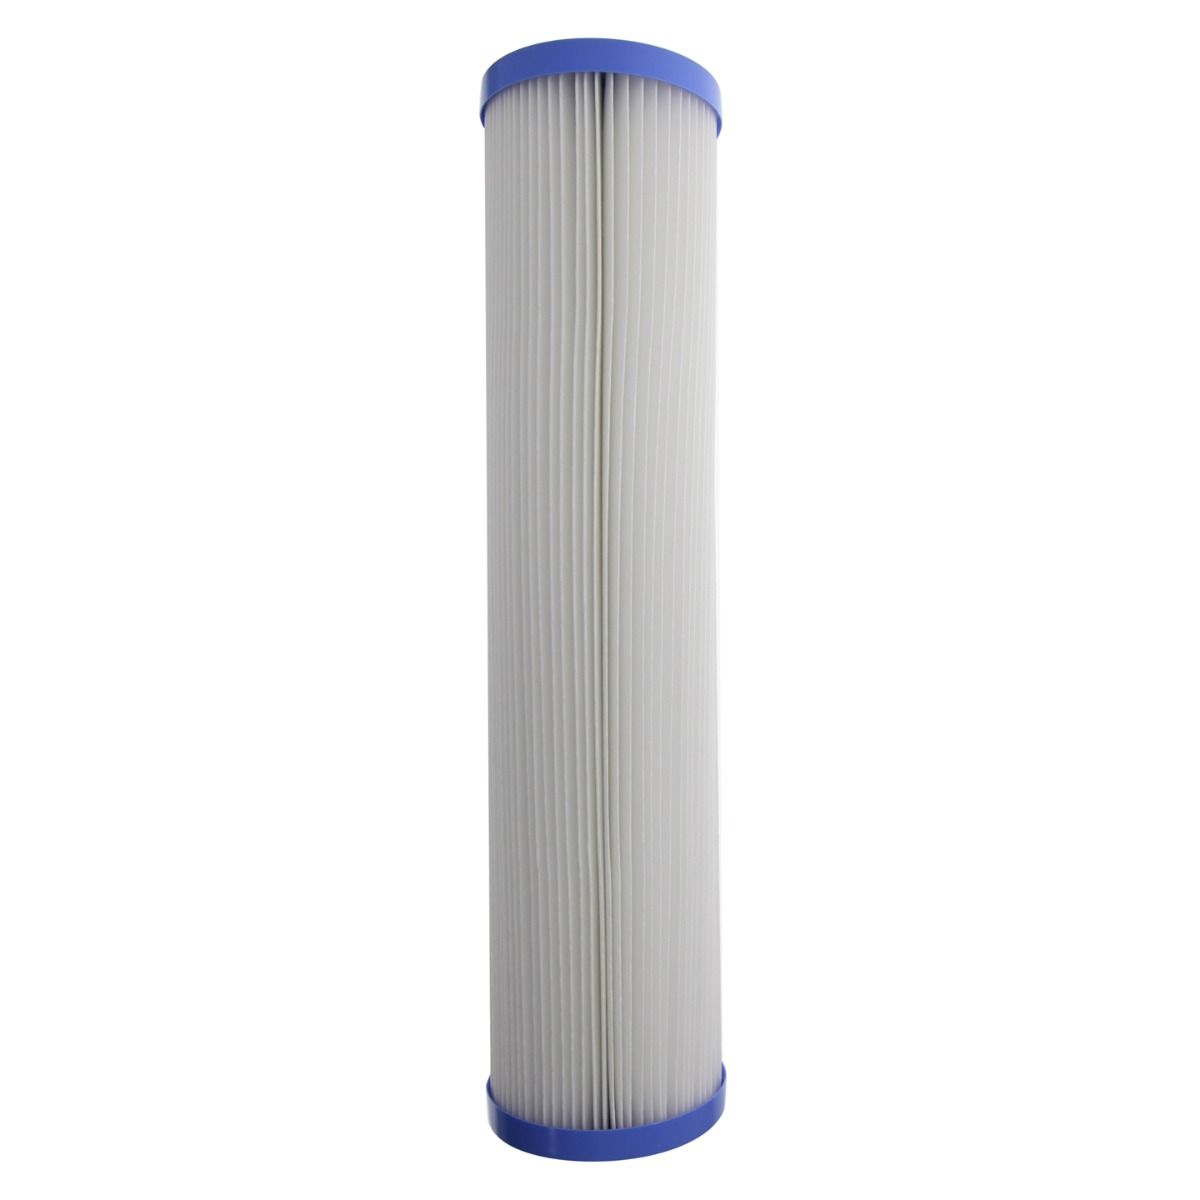 Pentek R30-20BB Pleated Polyester Water Filters (20-inch x 4-1/2-inch)